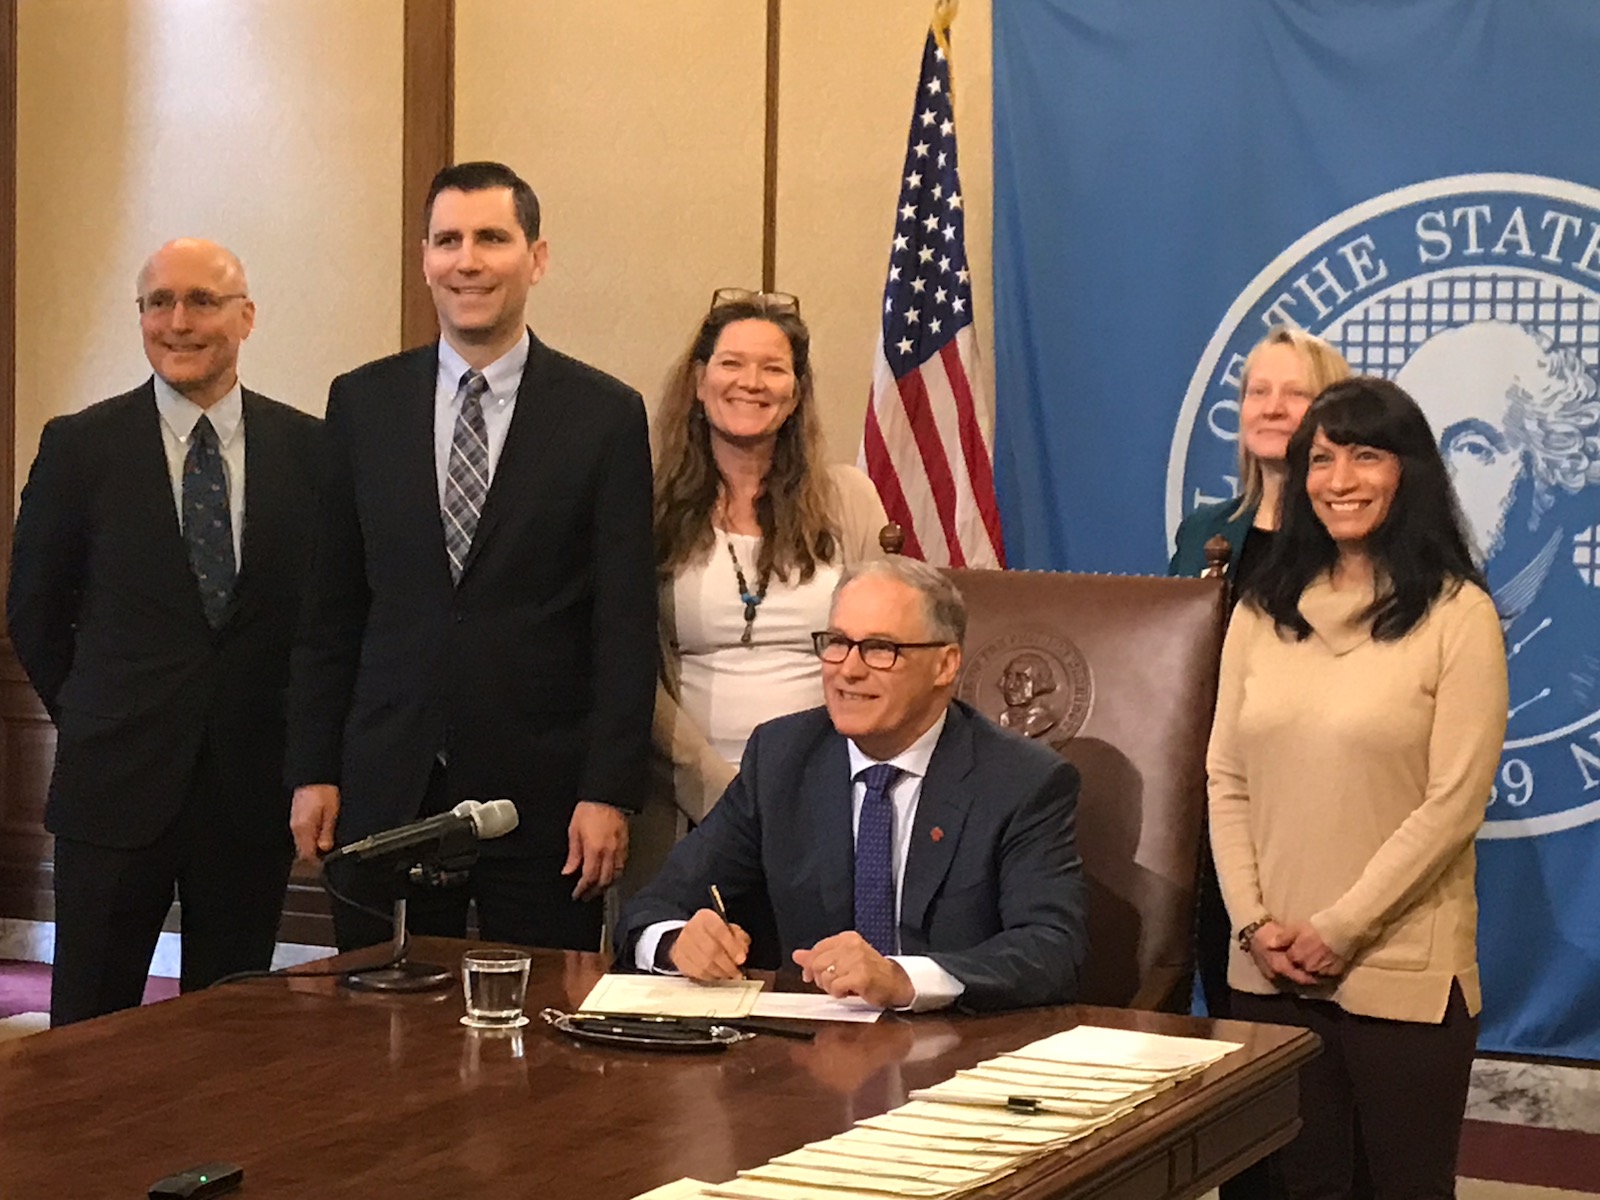 Washington state updates booster seat law to improve child safety